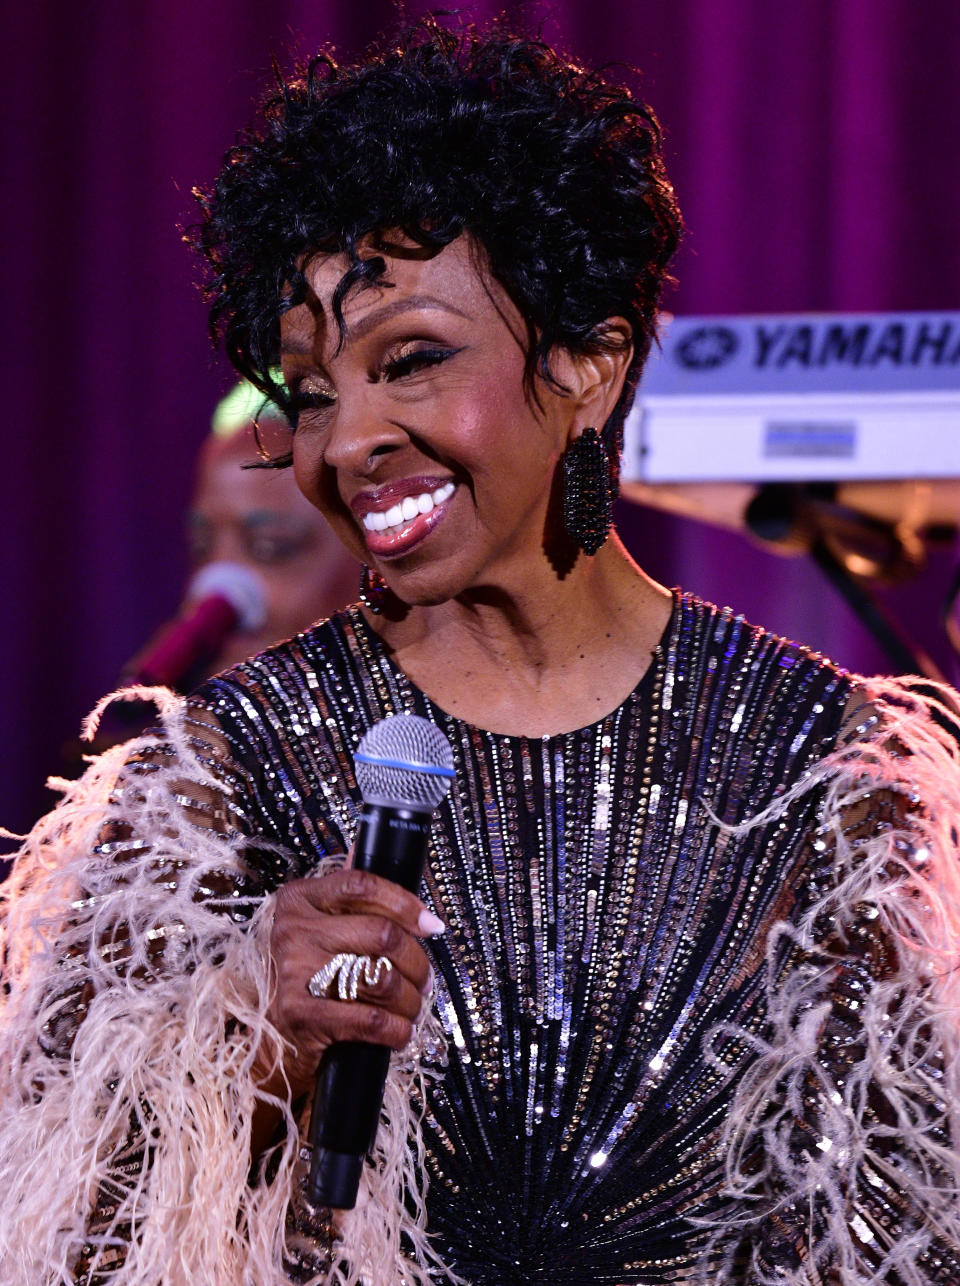 NEW YORK, NEW YORK – JUNE 06: Gladys Knight performs on stage during HSS 37th Annual Tribute Dinner at American Museum of Natural History on June 06, 2022 in New York City. (Photo by Eugene Gologursky/Getty Images for Hospital for Special Surgery)